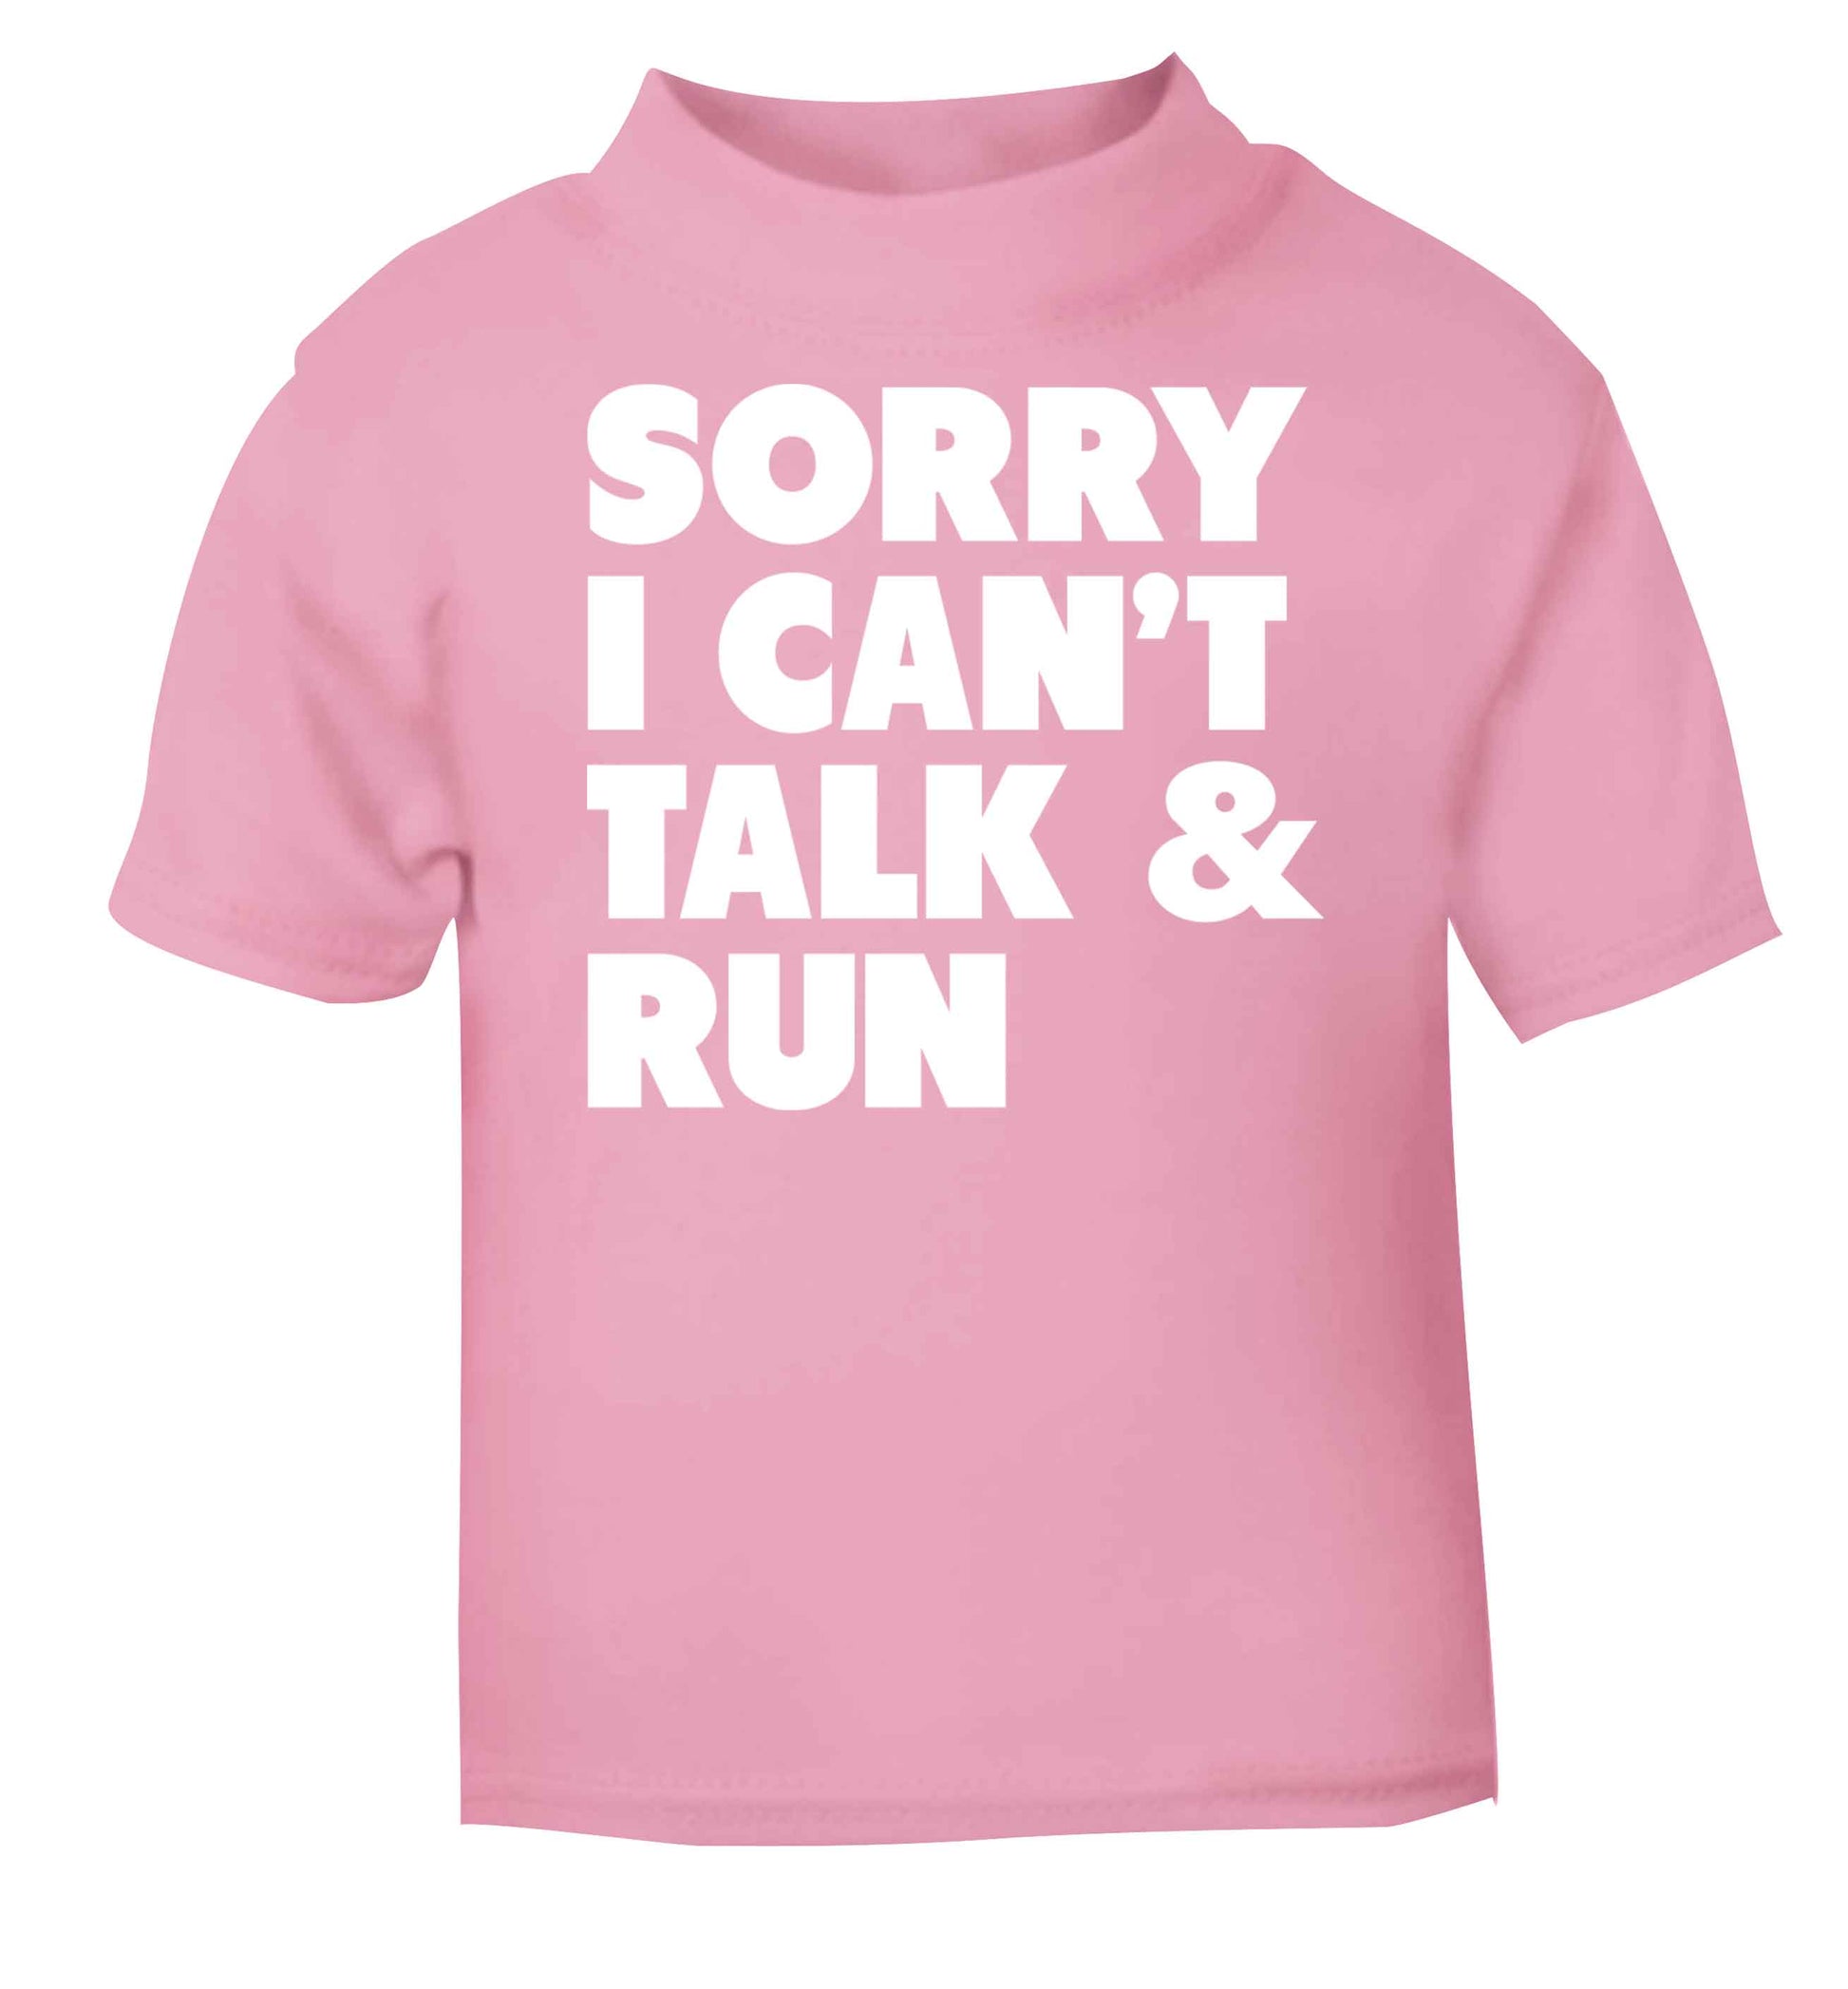 Sorry I can't talk and run light pink baby toddler Tshirt 2 Years